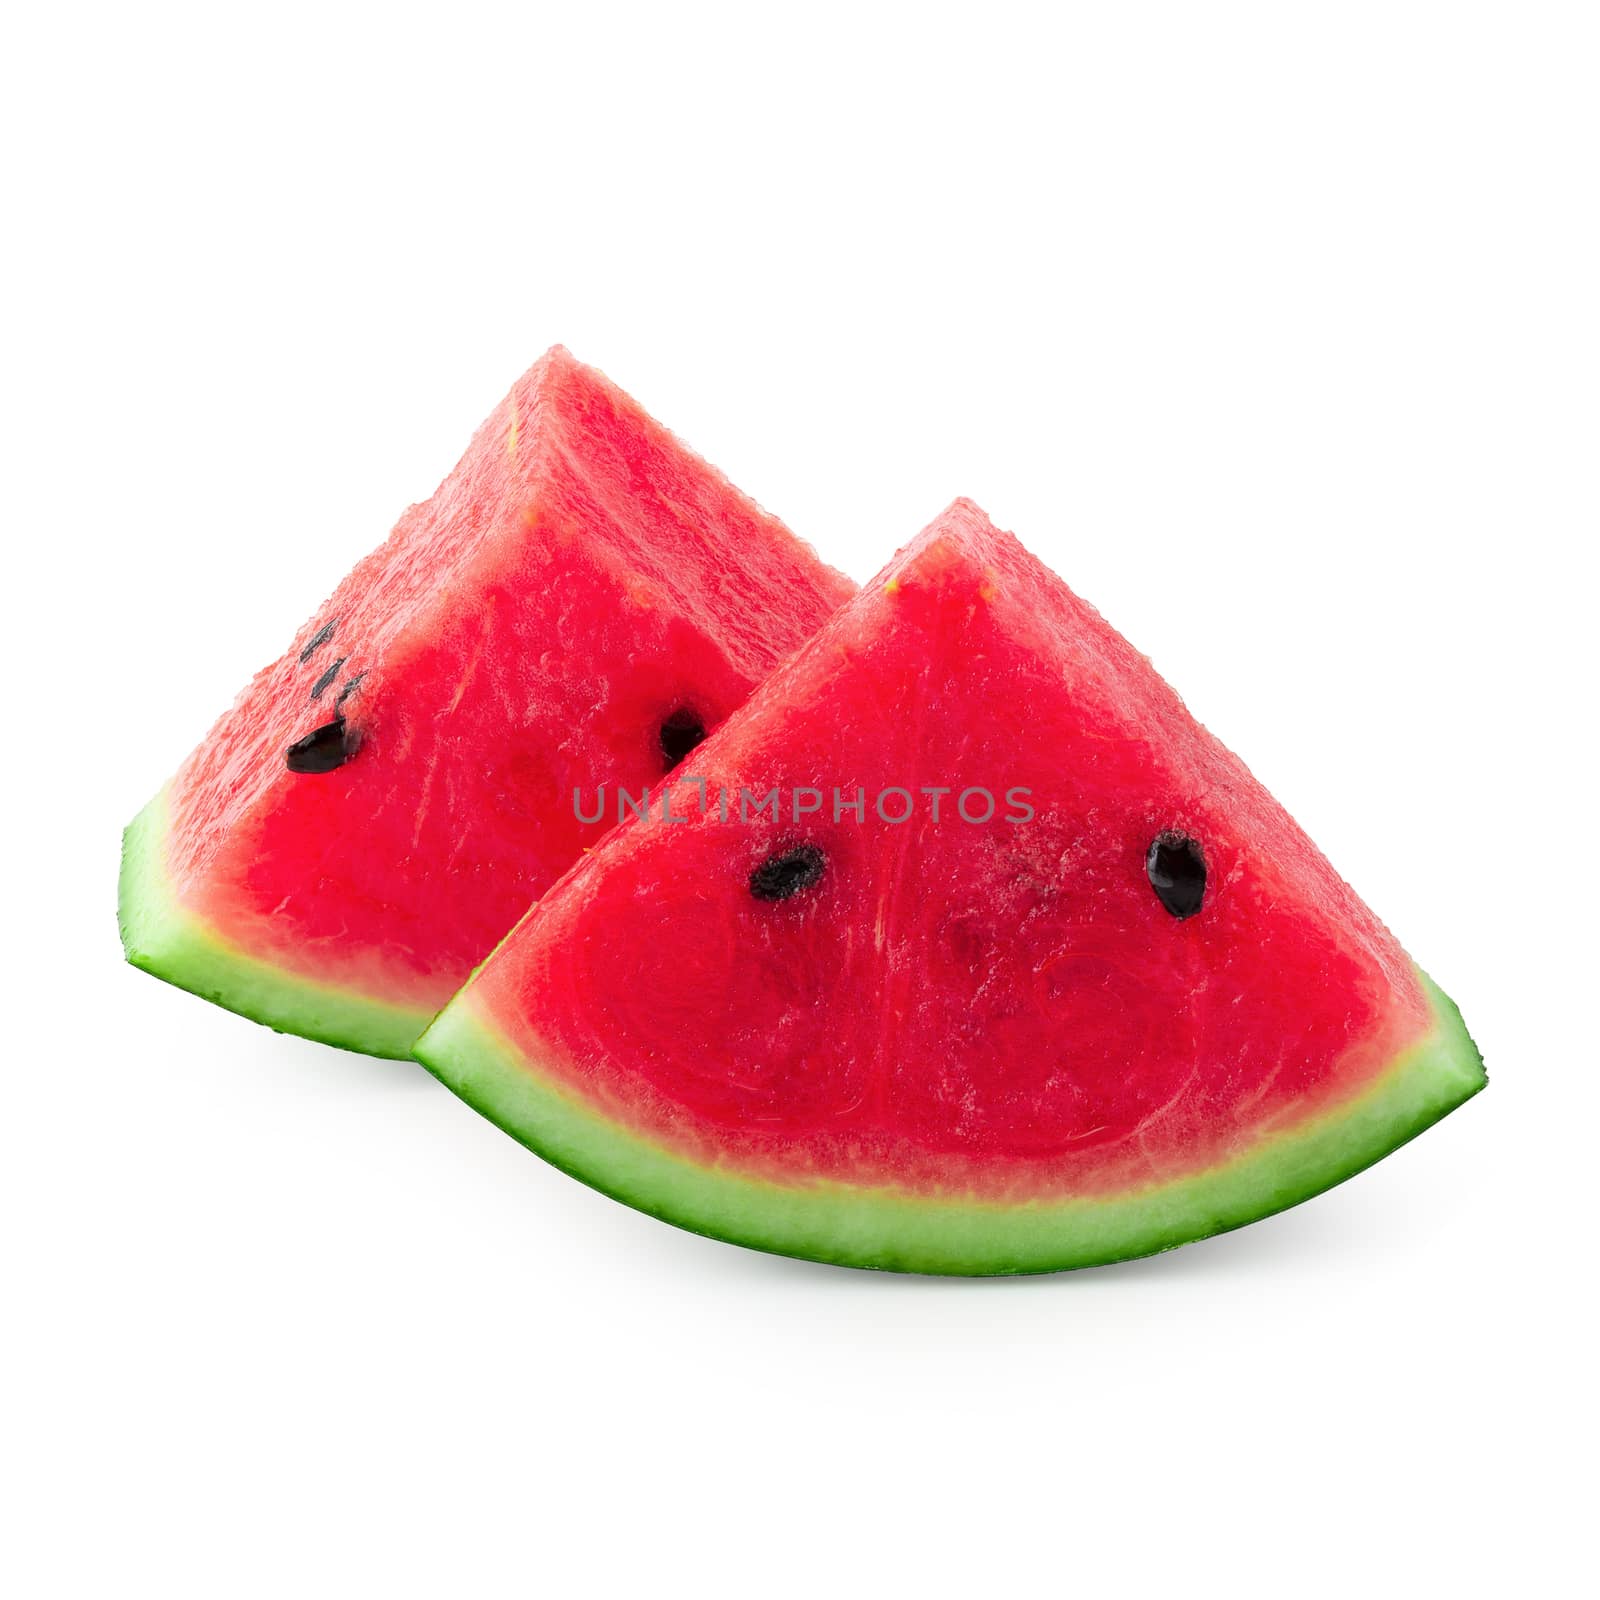 Sliced of watermelon isolated on white background by kaiskynet